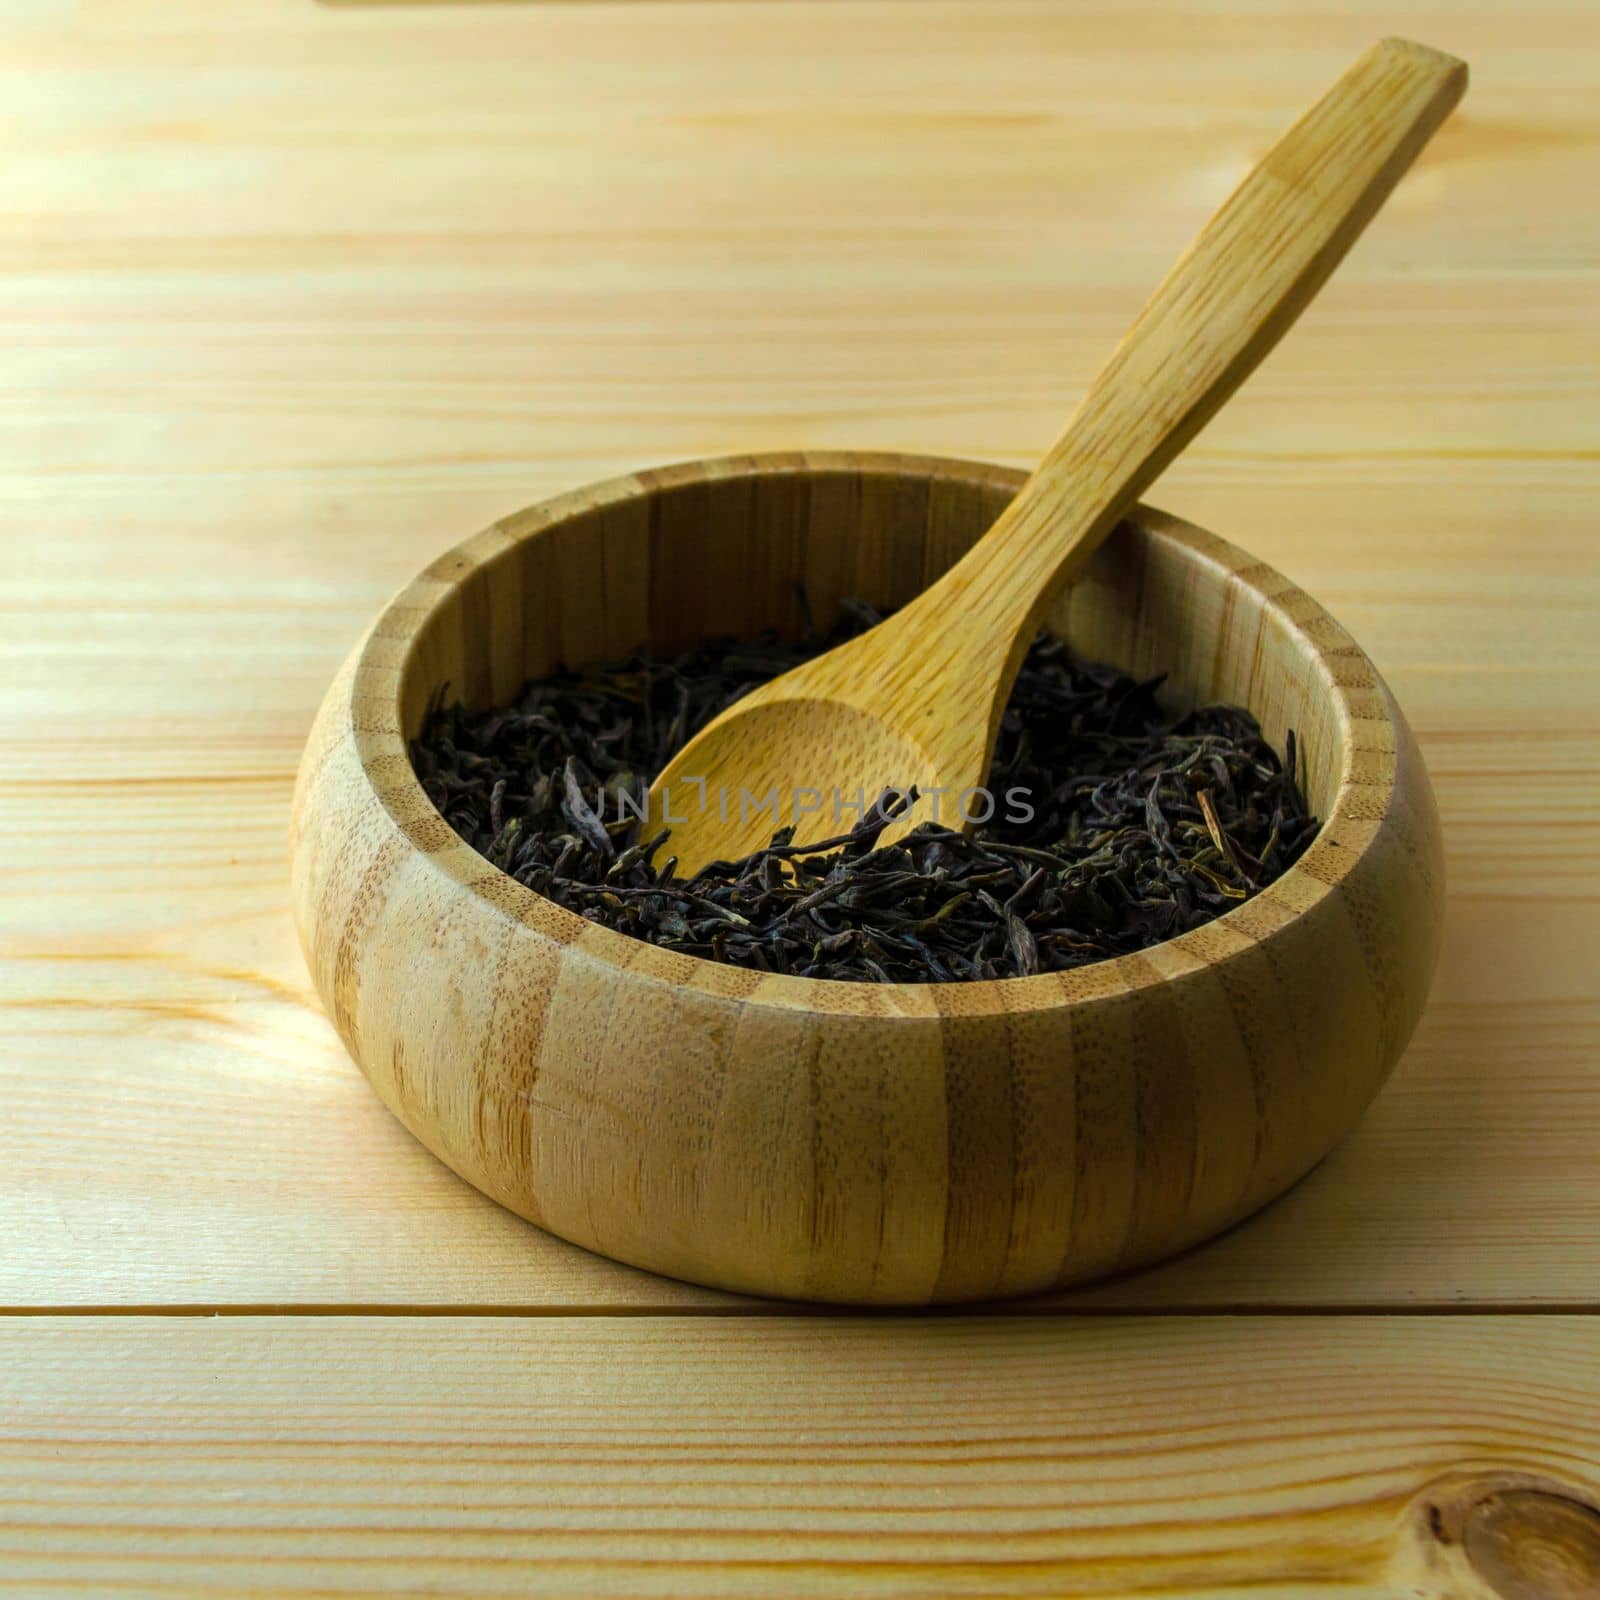 Leaf dry green tea, square photo. Leaf dry green tea in a wooden plate on a wooden table.